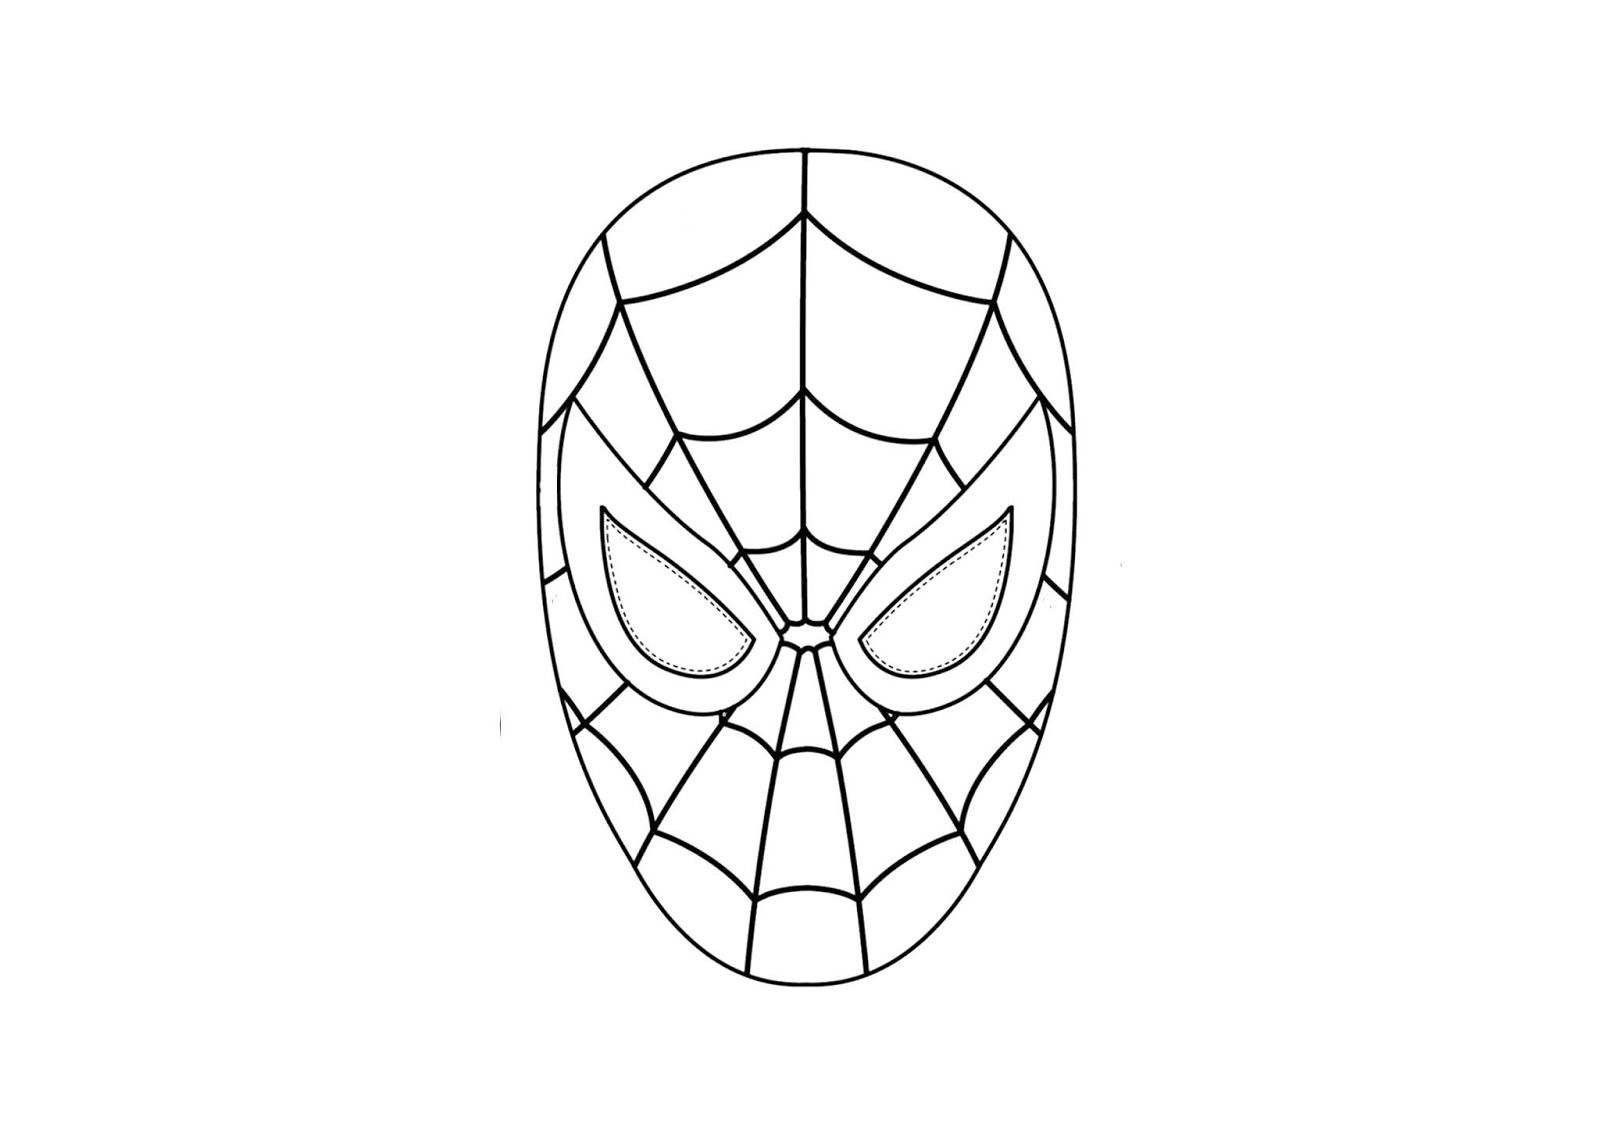 How To Draw Spiderman Step By Step How To Images Collection